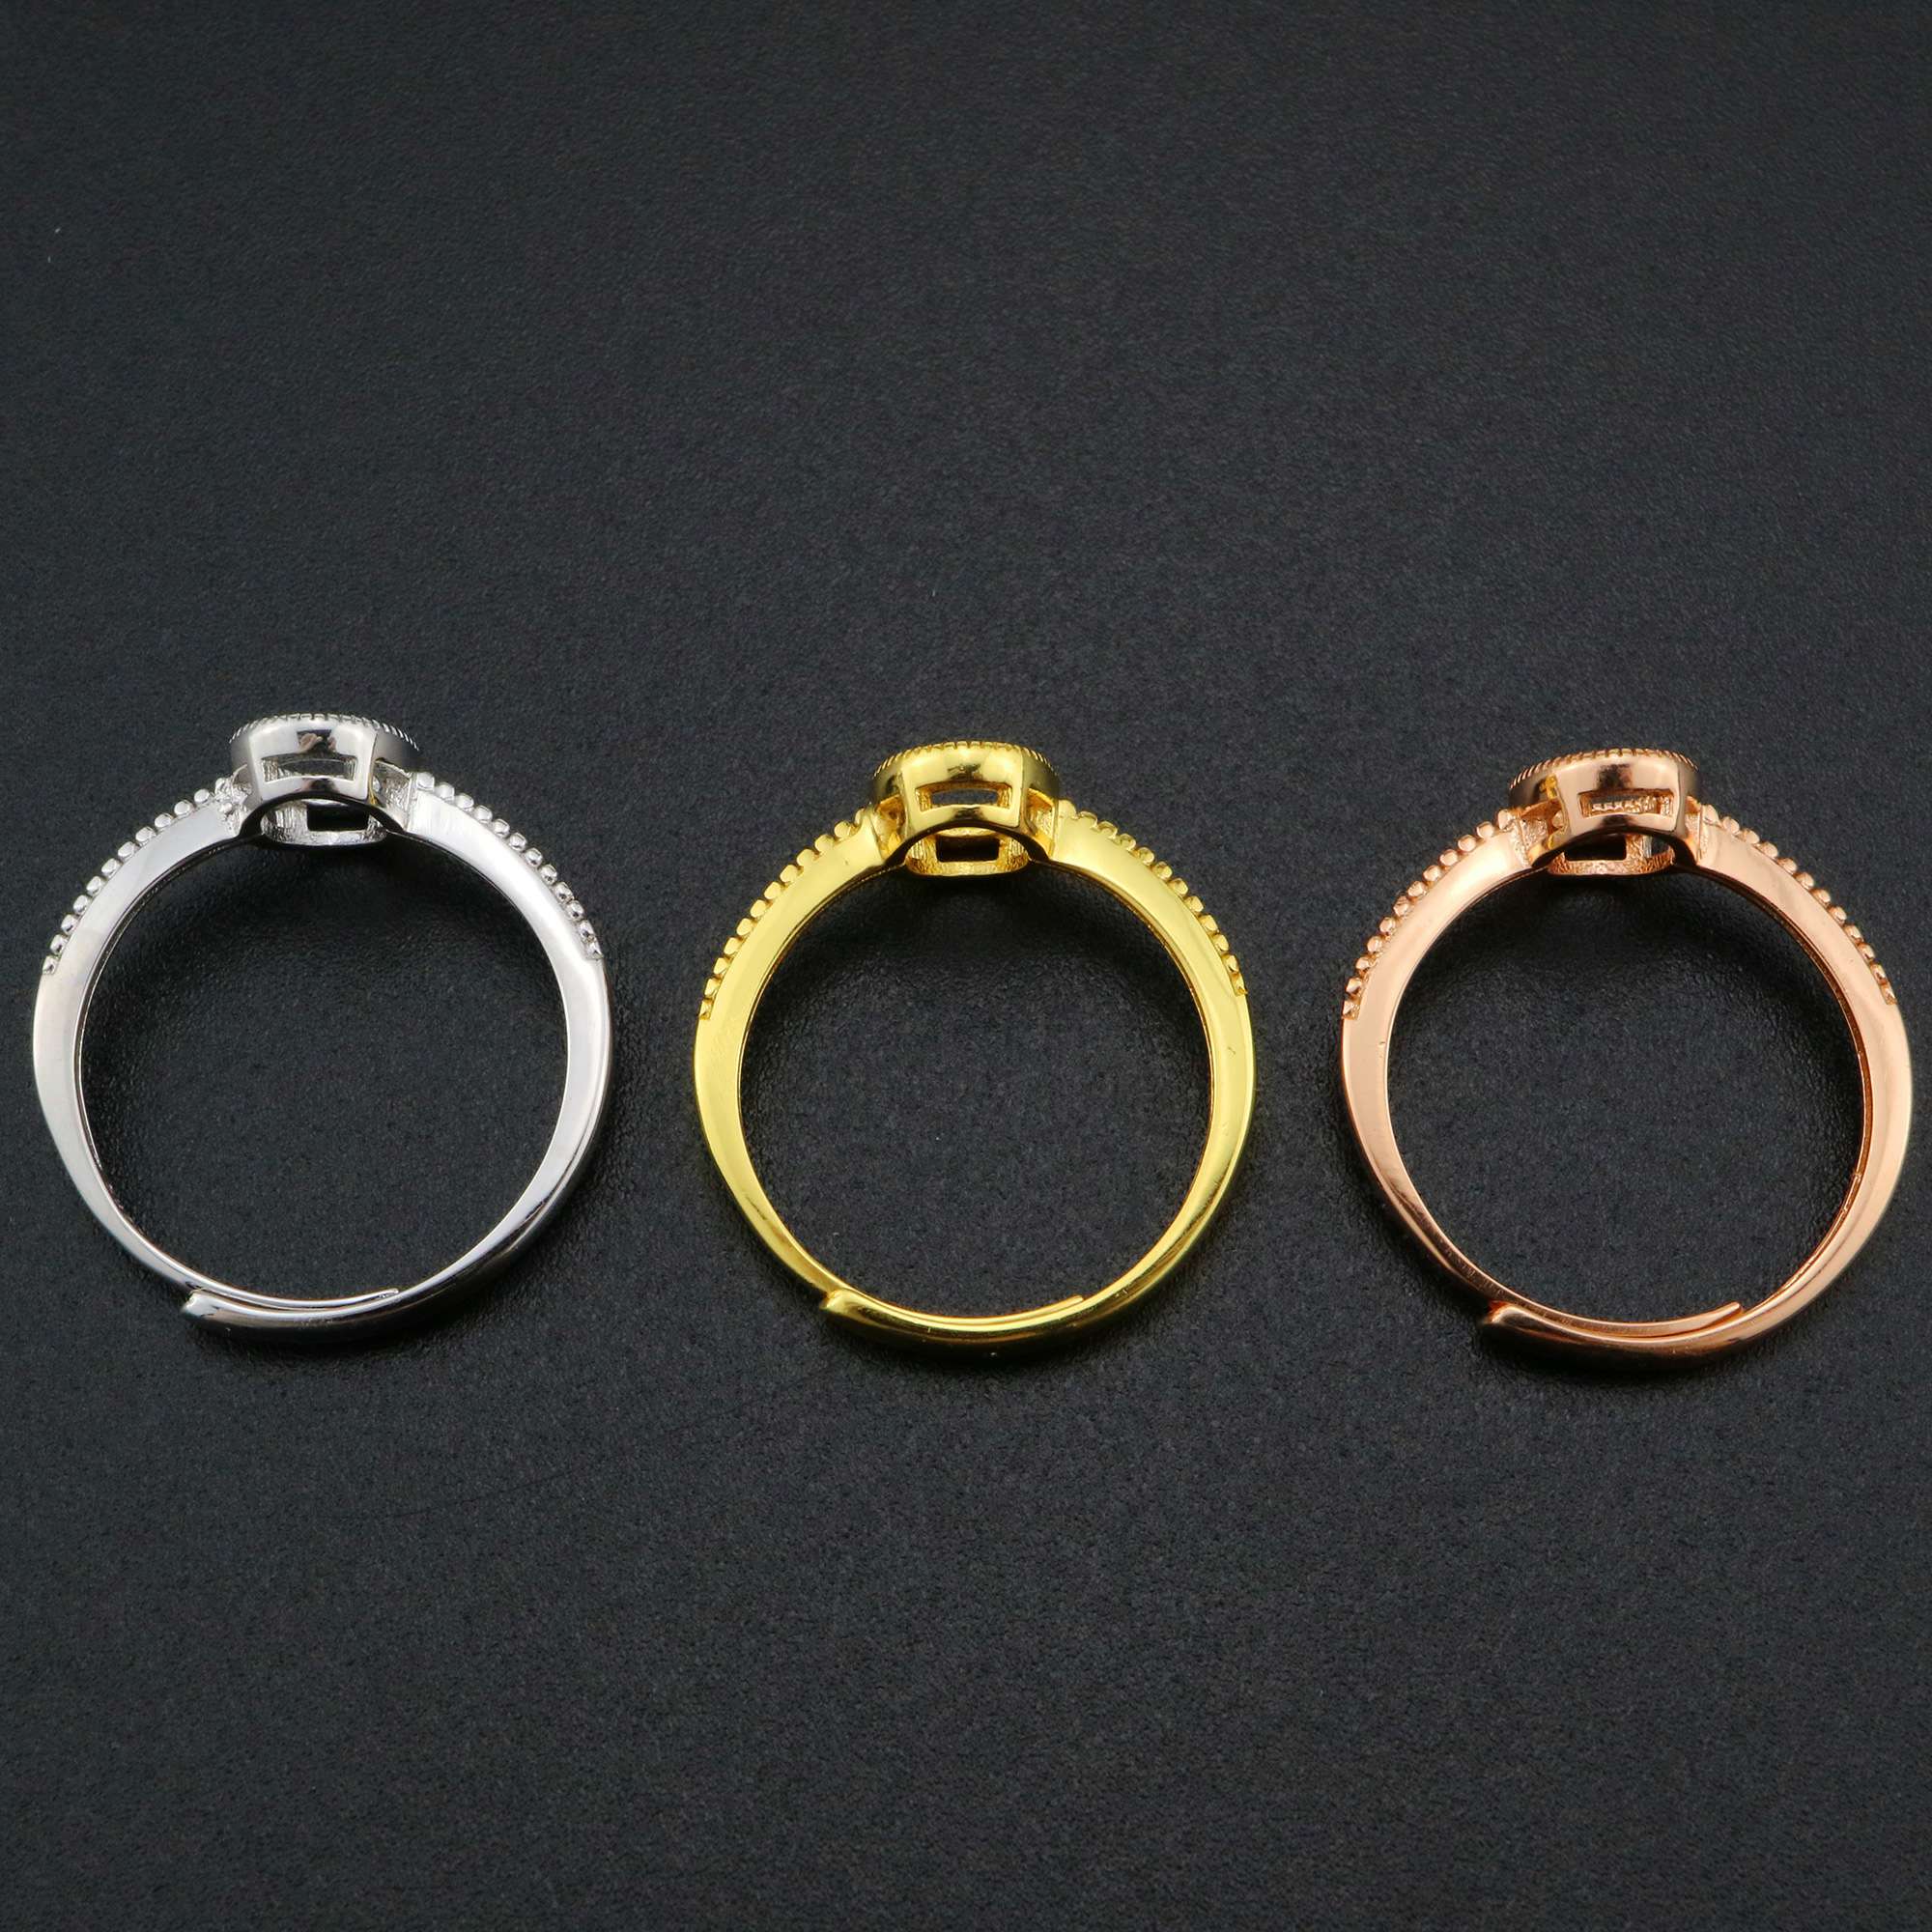 5x7MM Oval Bezel Ring Settings Antiqued Style Solid 925 Sterling Silver Rose Gold Plated DIY Adjustable Ring for Gemstone 1224070 - Click Image to Close